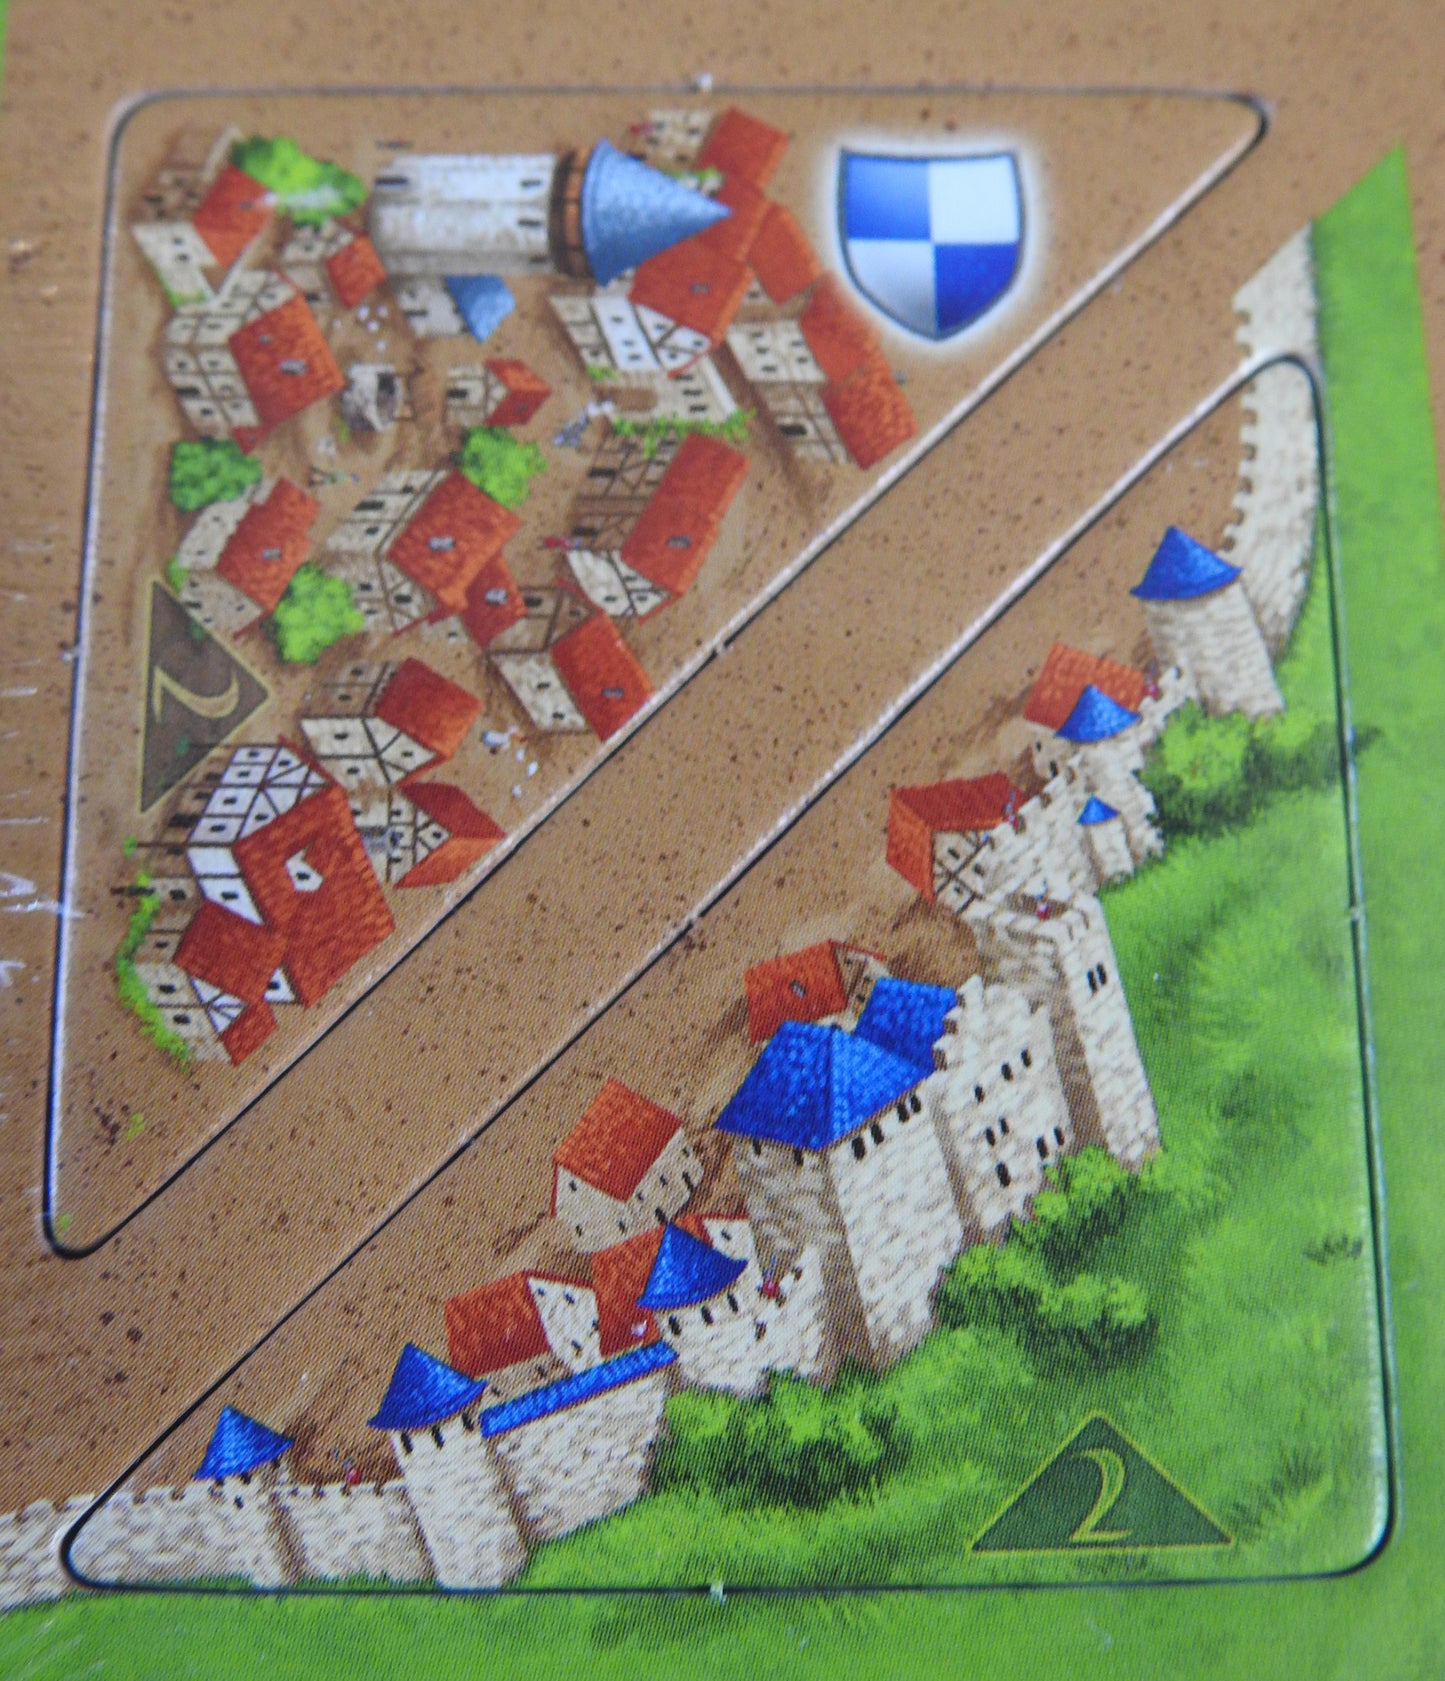 Close-up of two half tiles showing city walls.